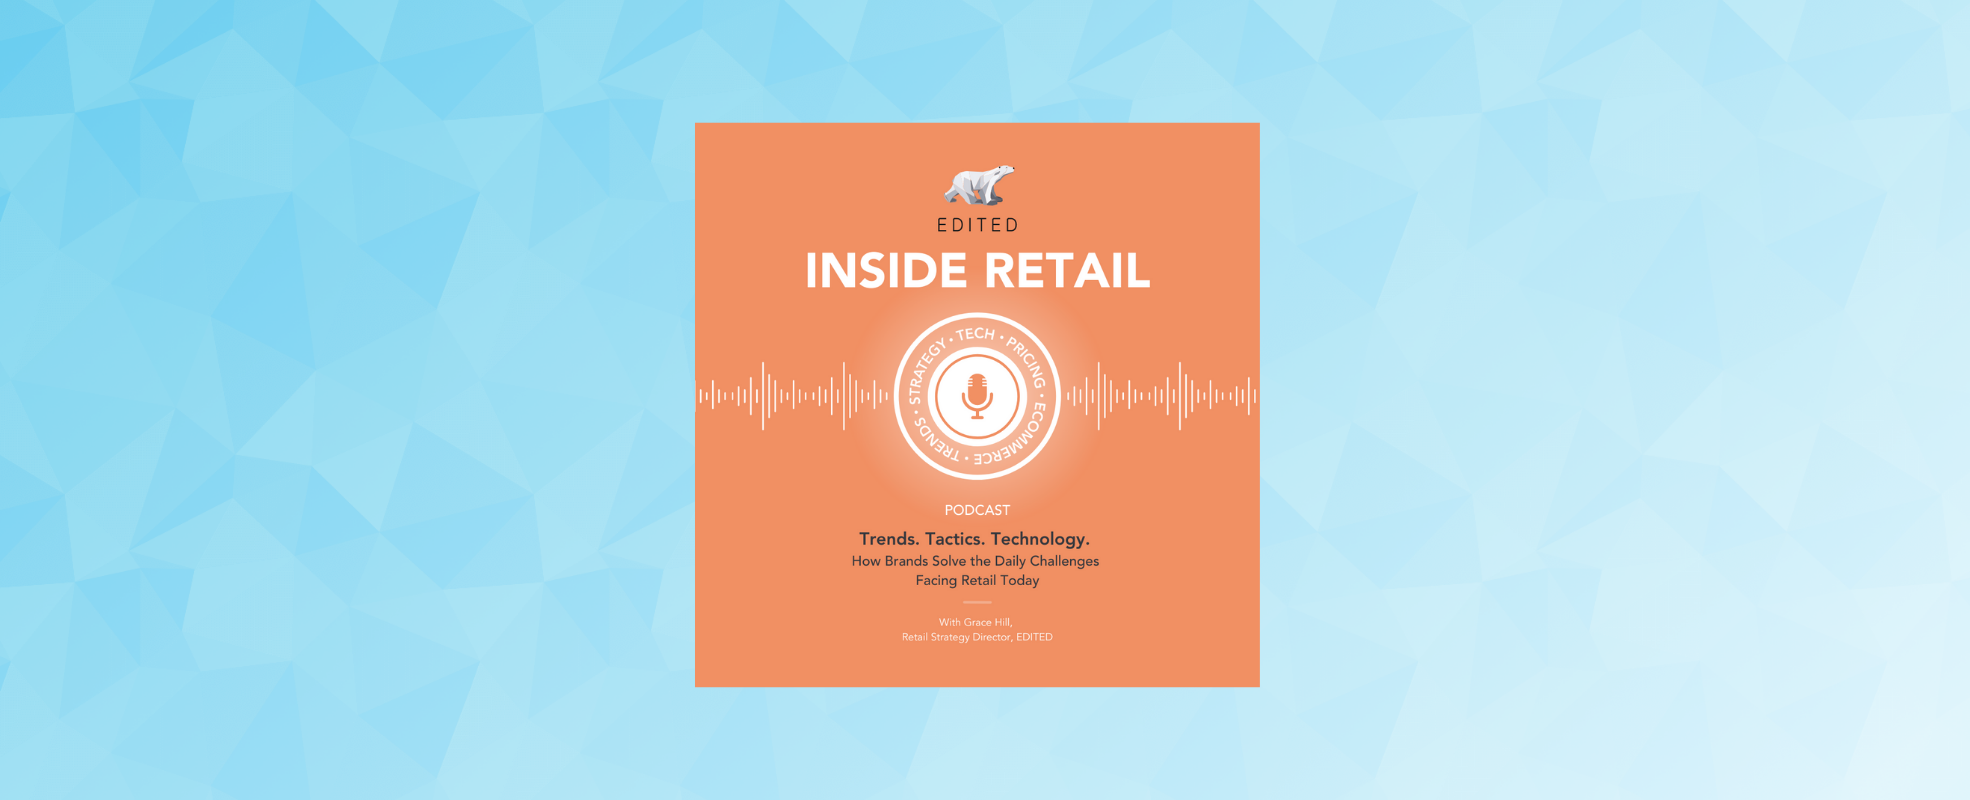 Inside Retail EDITED Podcast: Depop: The circular economy, how to deliver growth via strategic inventory optimization, and the future of the resale market